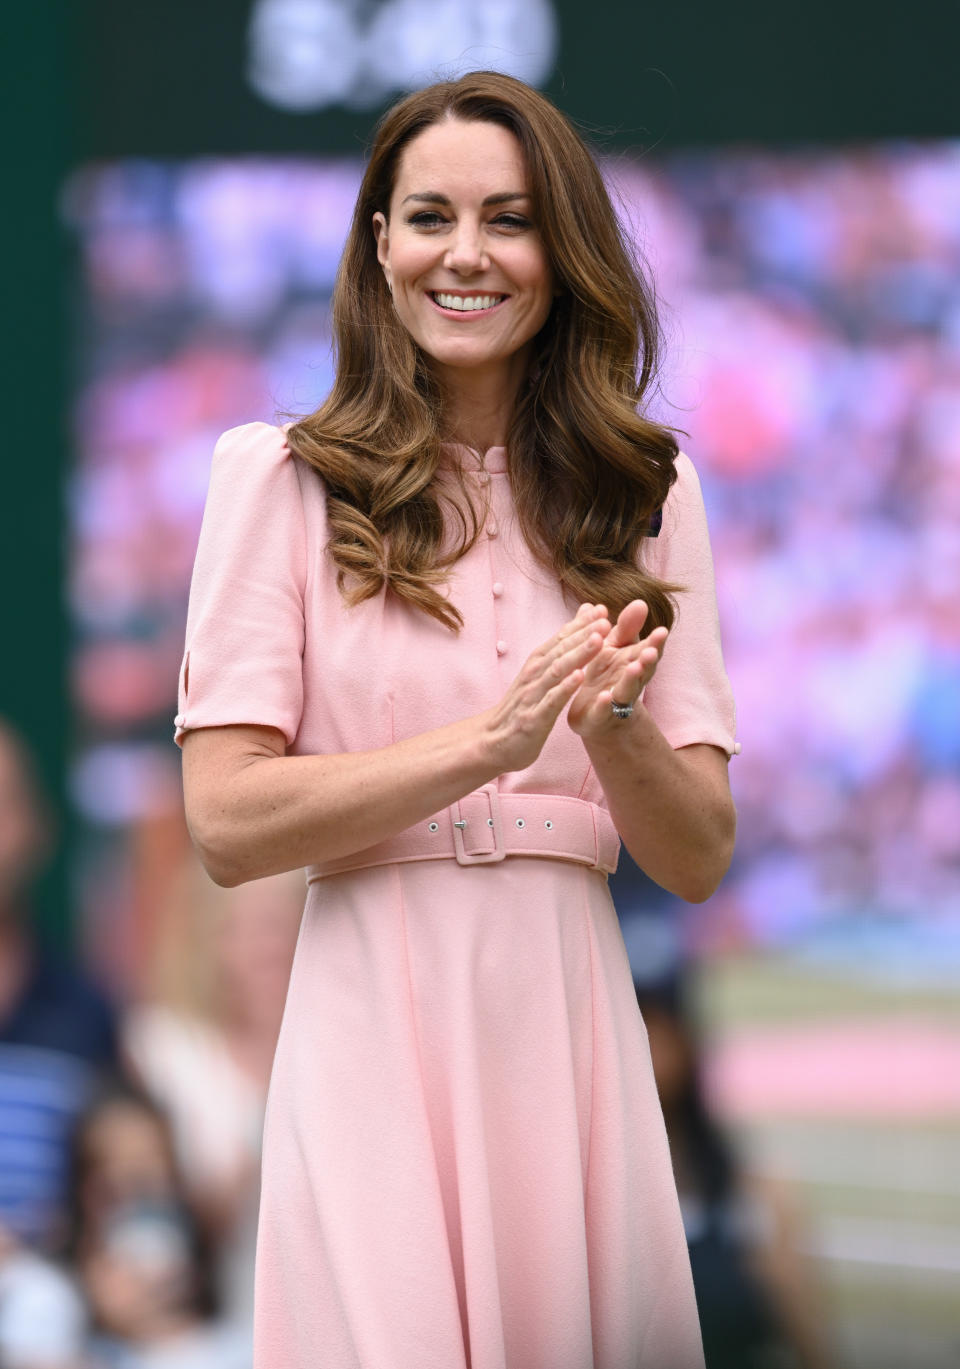 Catherine, Duchess of Cambridge wearing a light pink dress at day 13 of the Wimbledon Tennis Championships at All England Lawn Tennis and Croquet Club on July 11, 2021 in London, England. (Photo by Karwai Tang/WireImage)